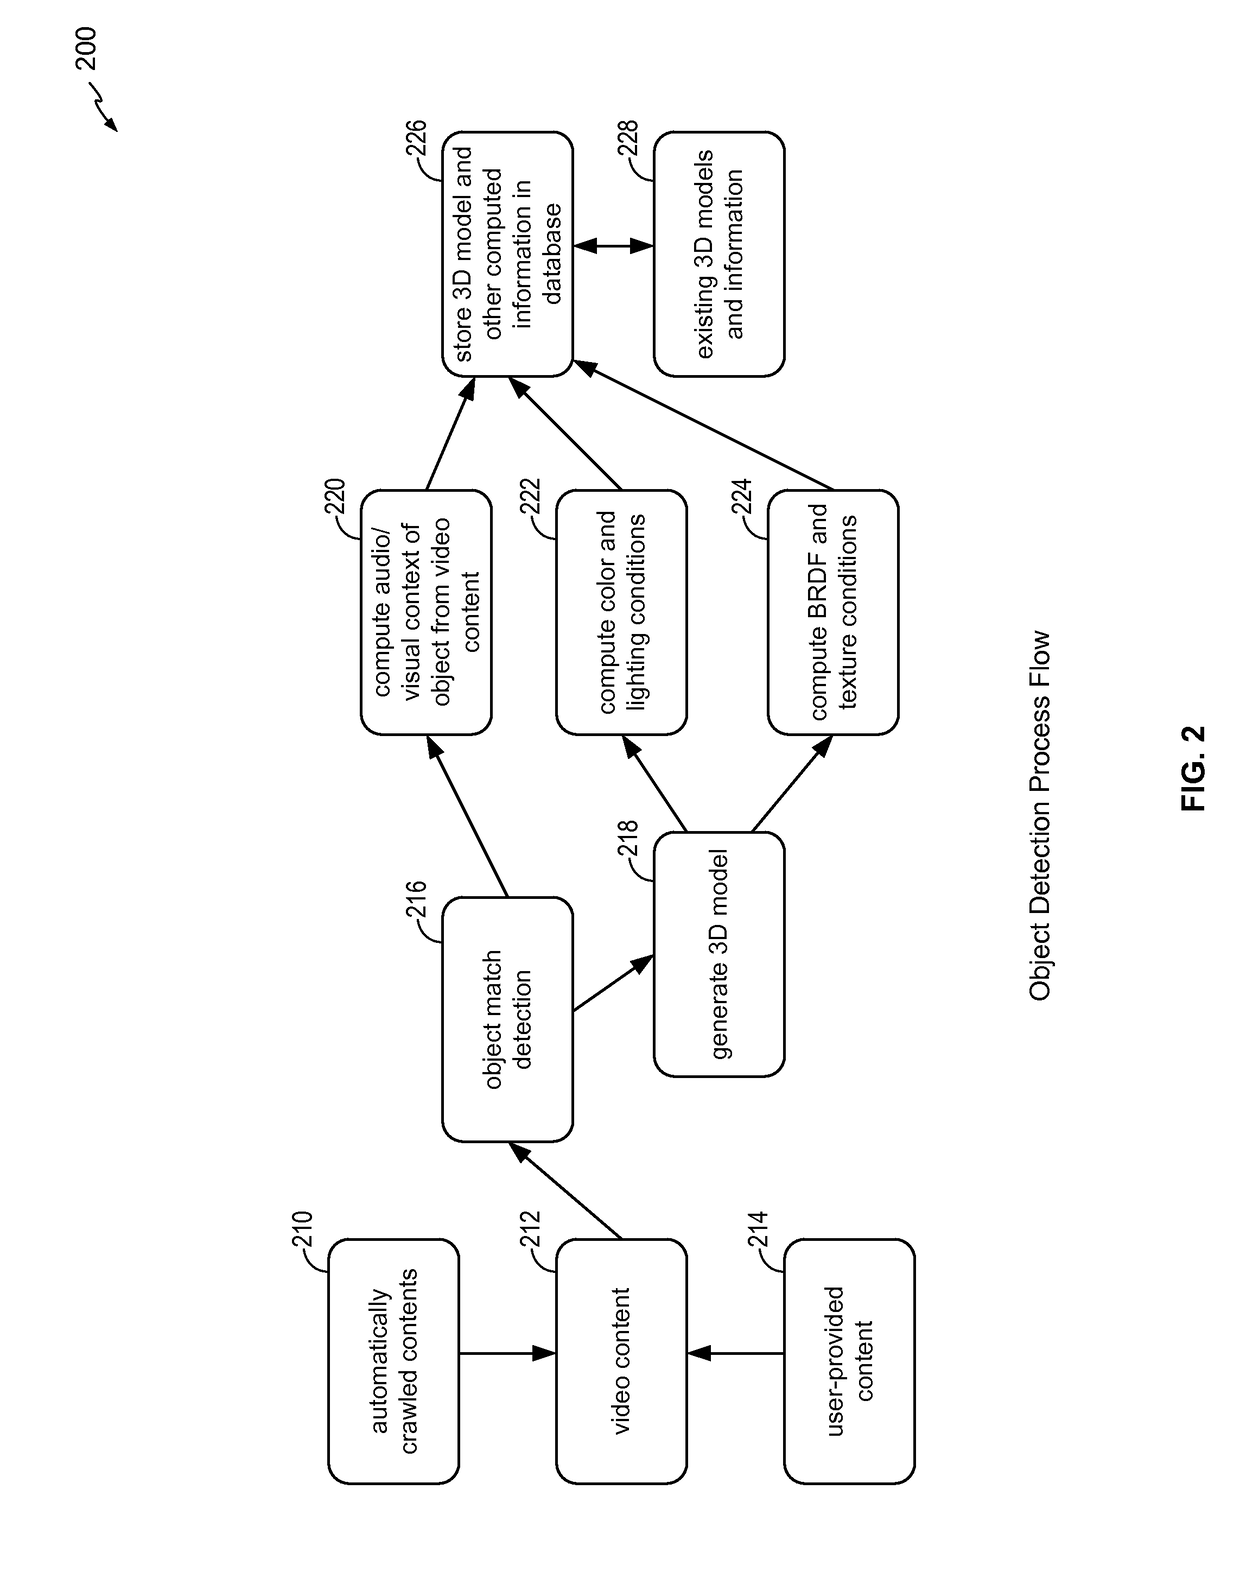 System and method to digitally replace objects in images or video